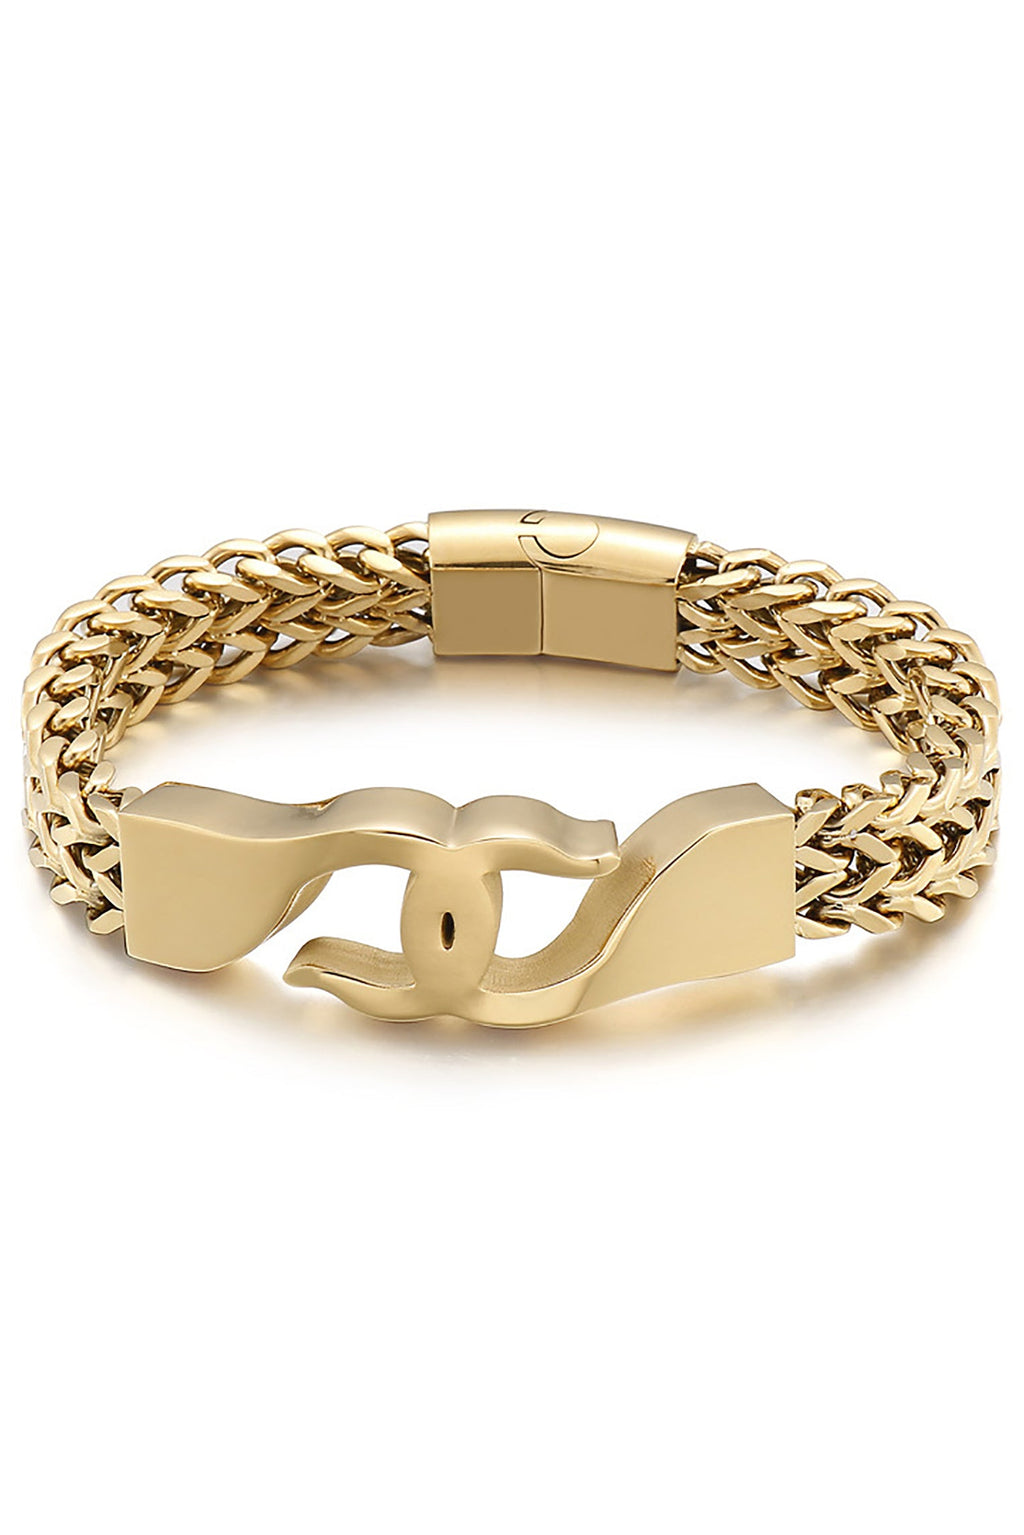 Benjamin Titanium Bracelet: Refined Style for Every Occasion